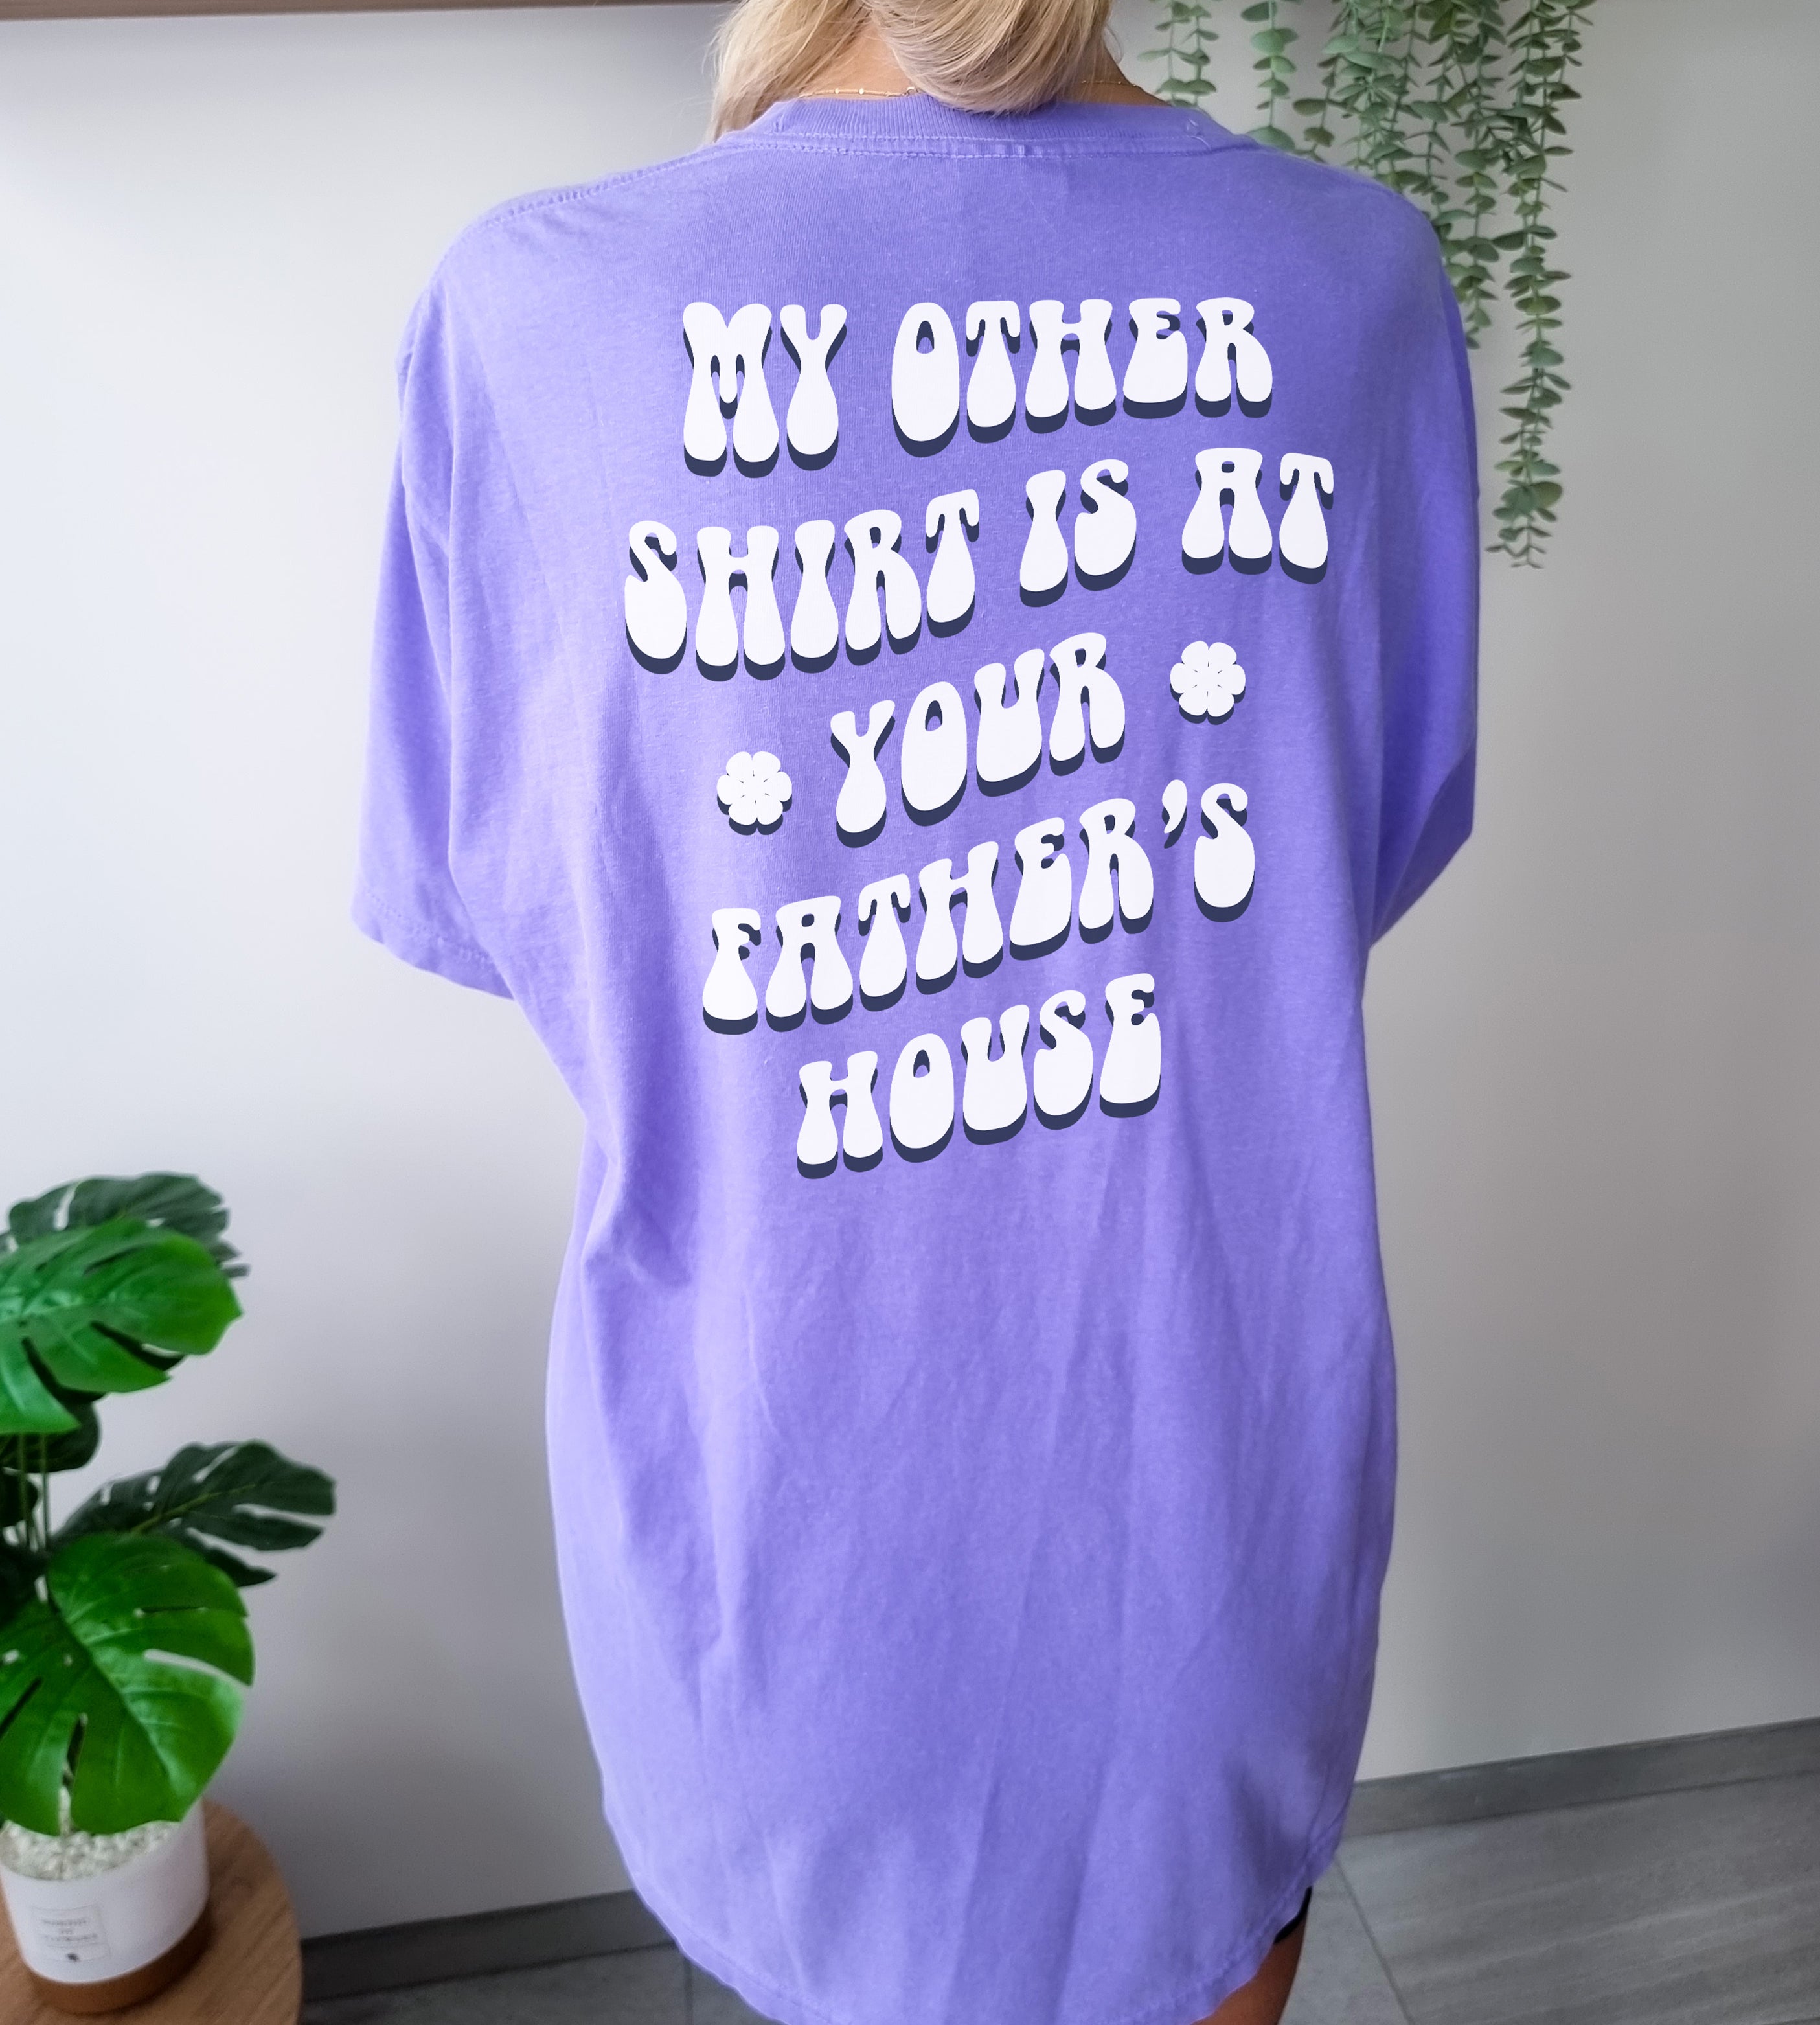 My other shirt is at your father's house T-Shirt